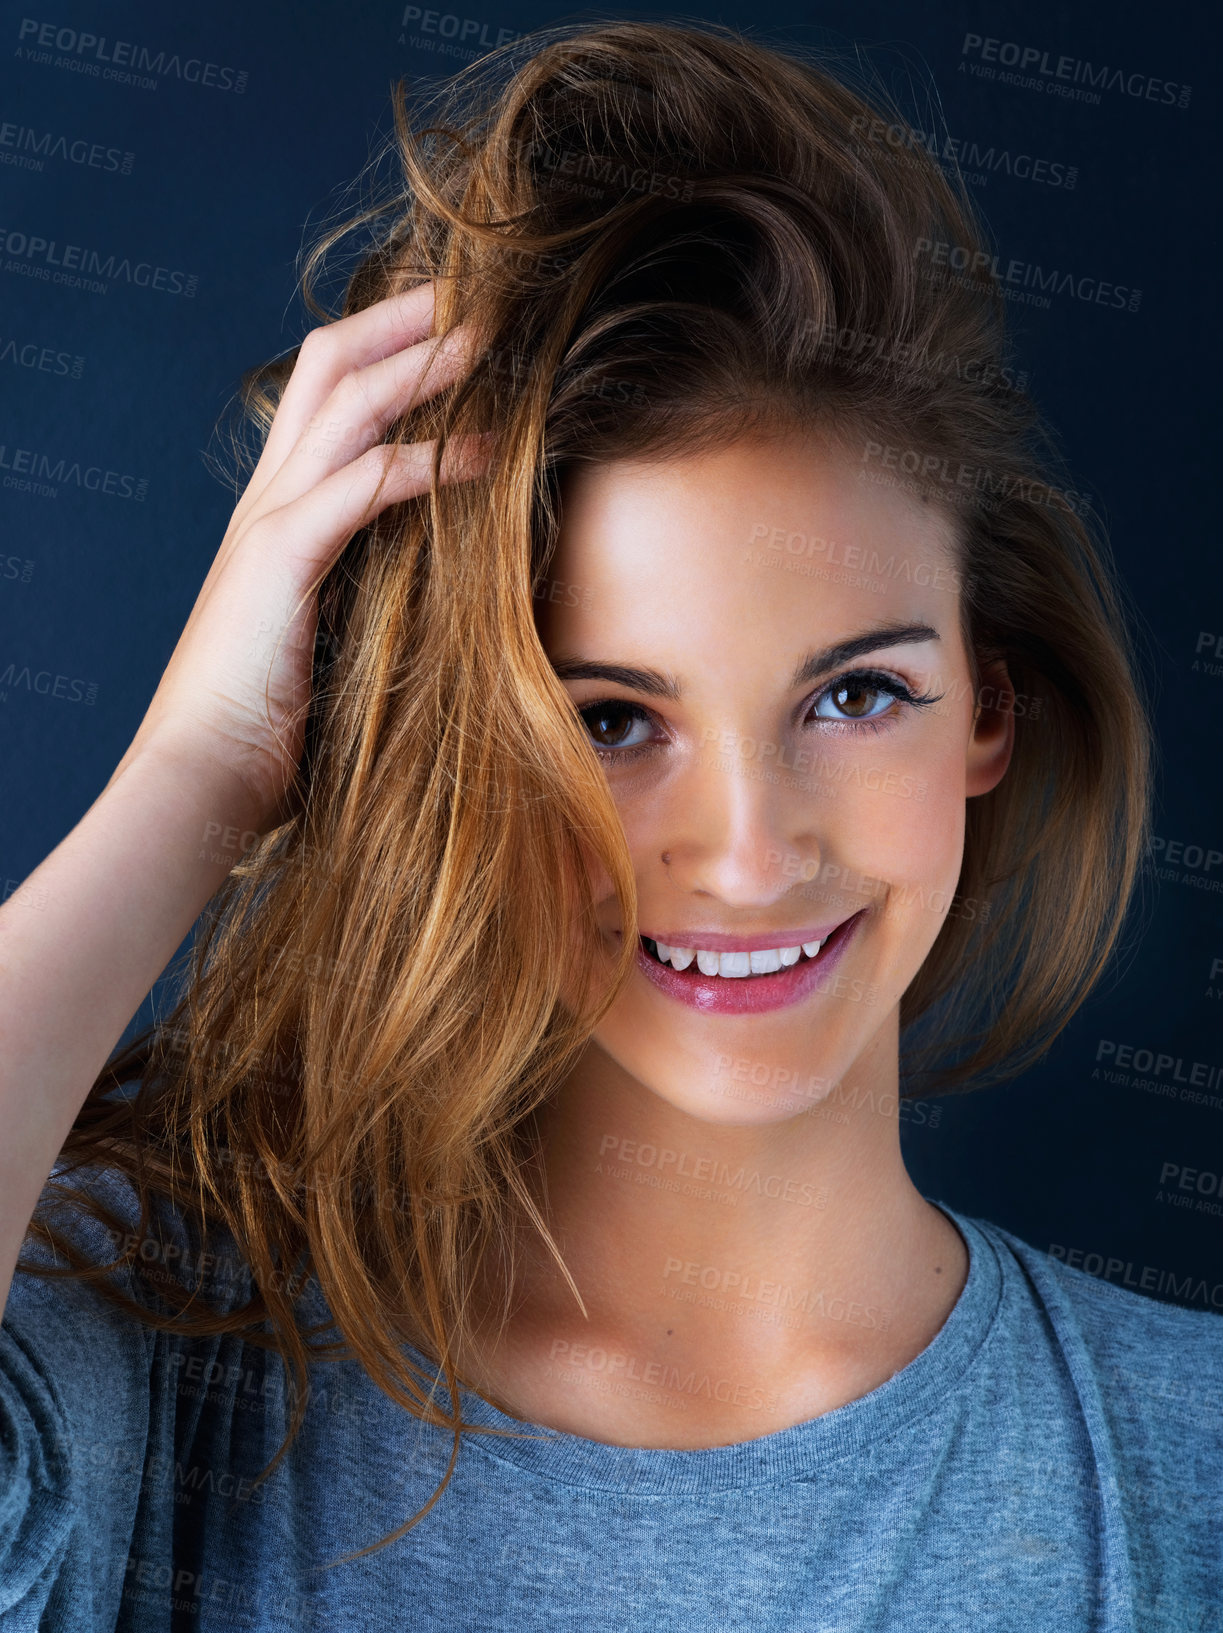 Buy stock photo Studio portrait of a cute teenage girl with her hand in her hair posing against a dark background